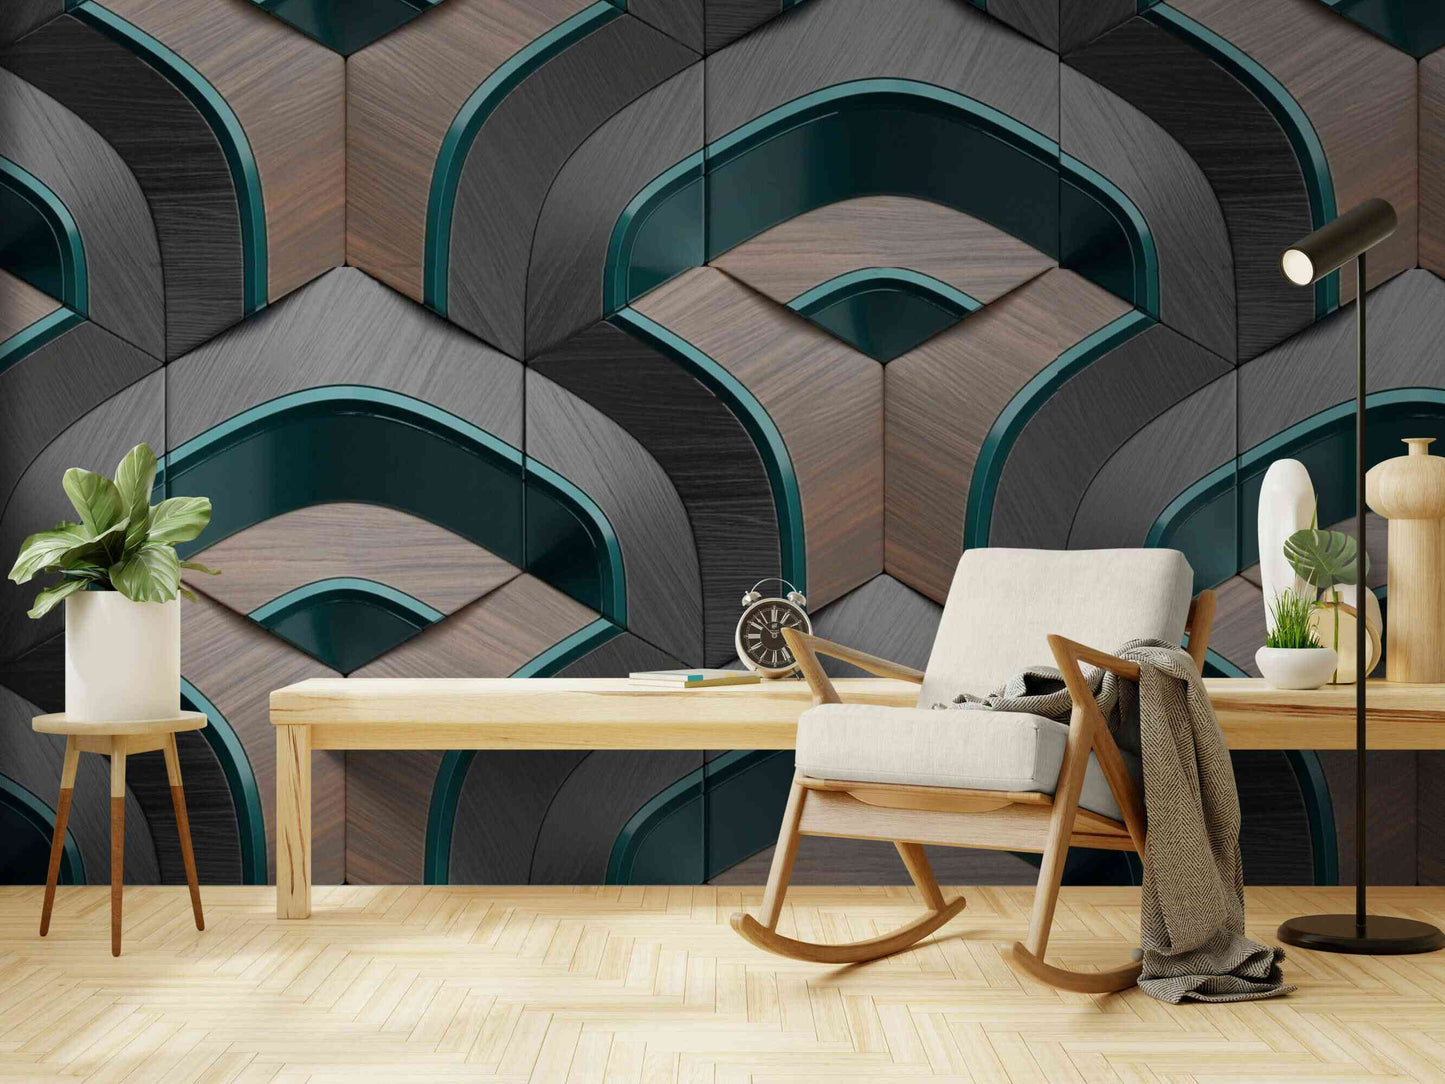 Abstract 3D Wallpaper Mural in a Kitchen